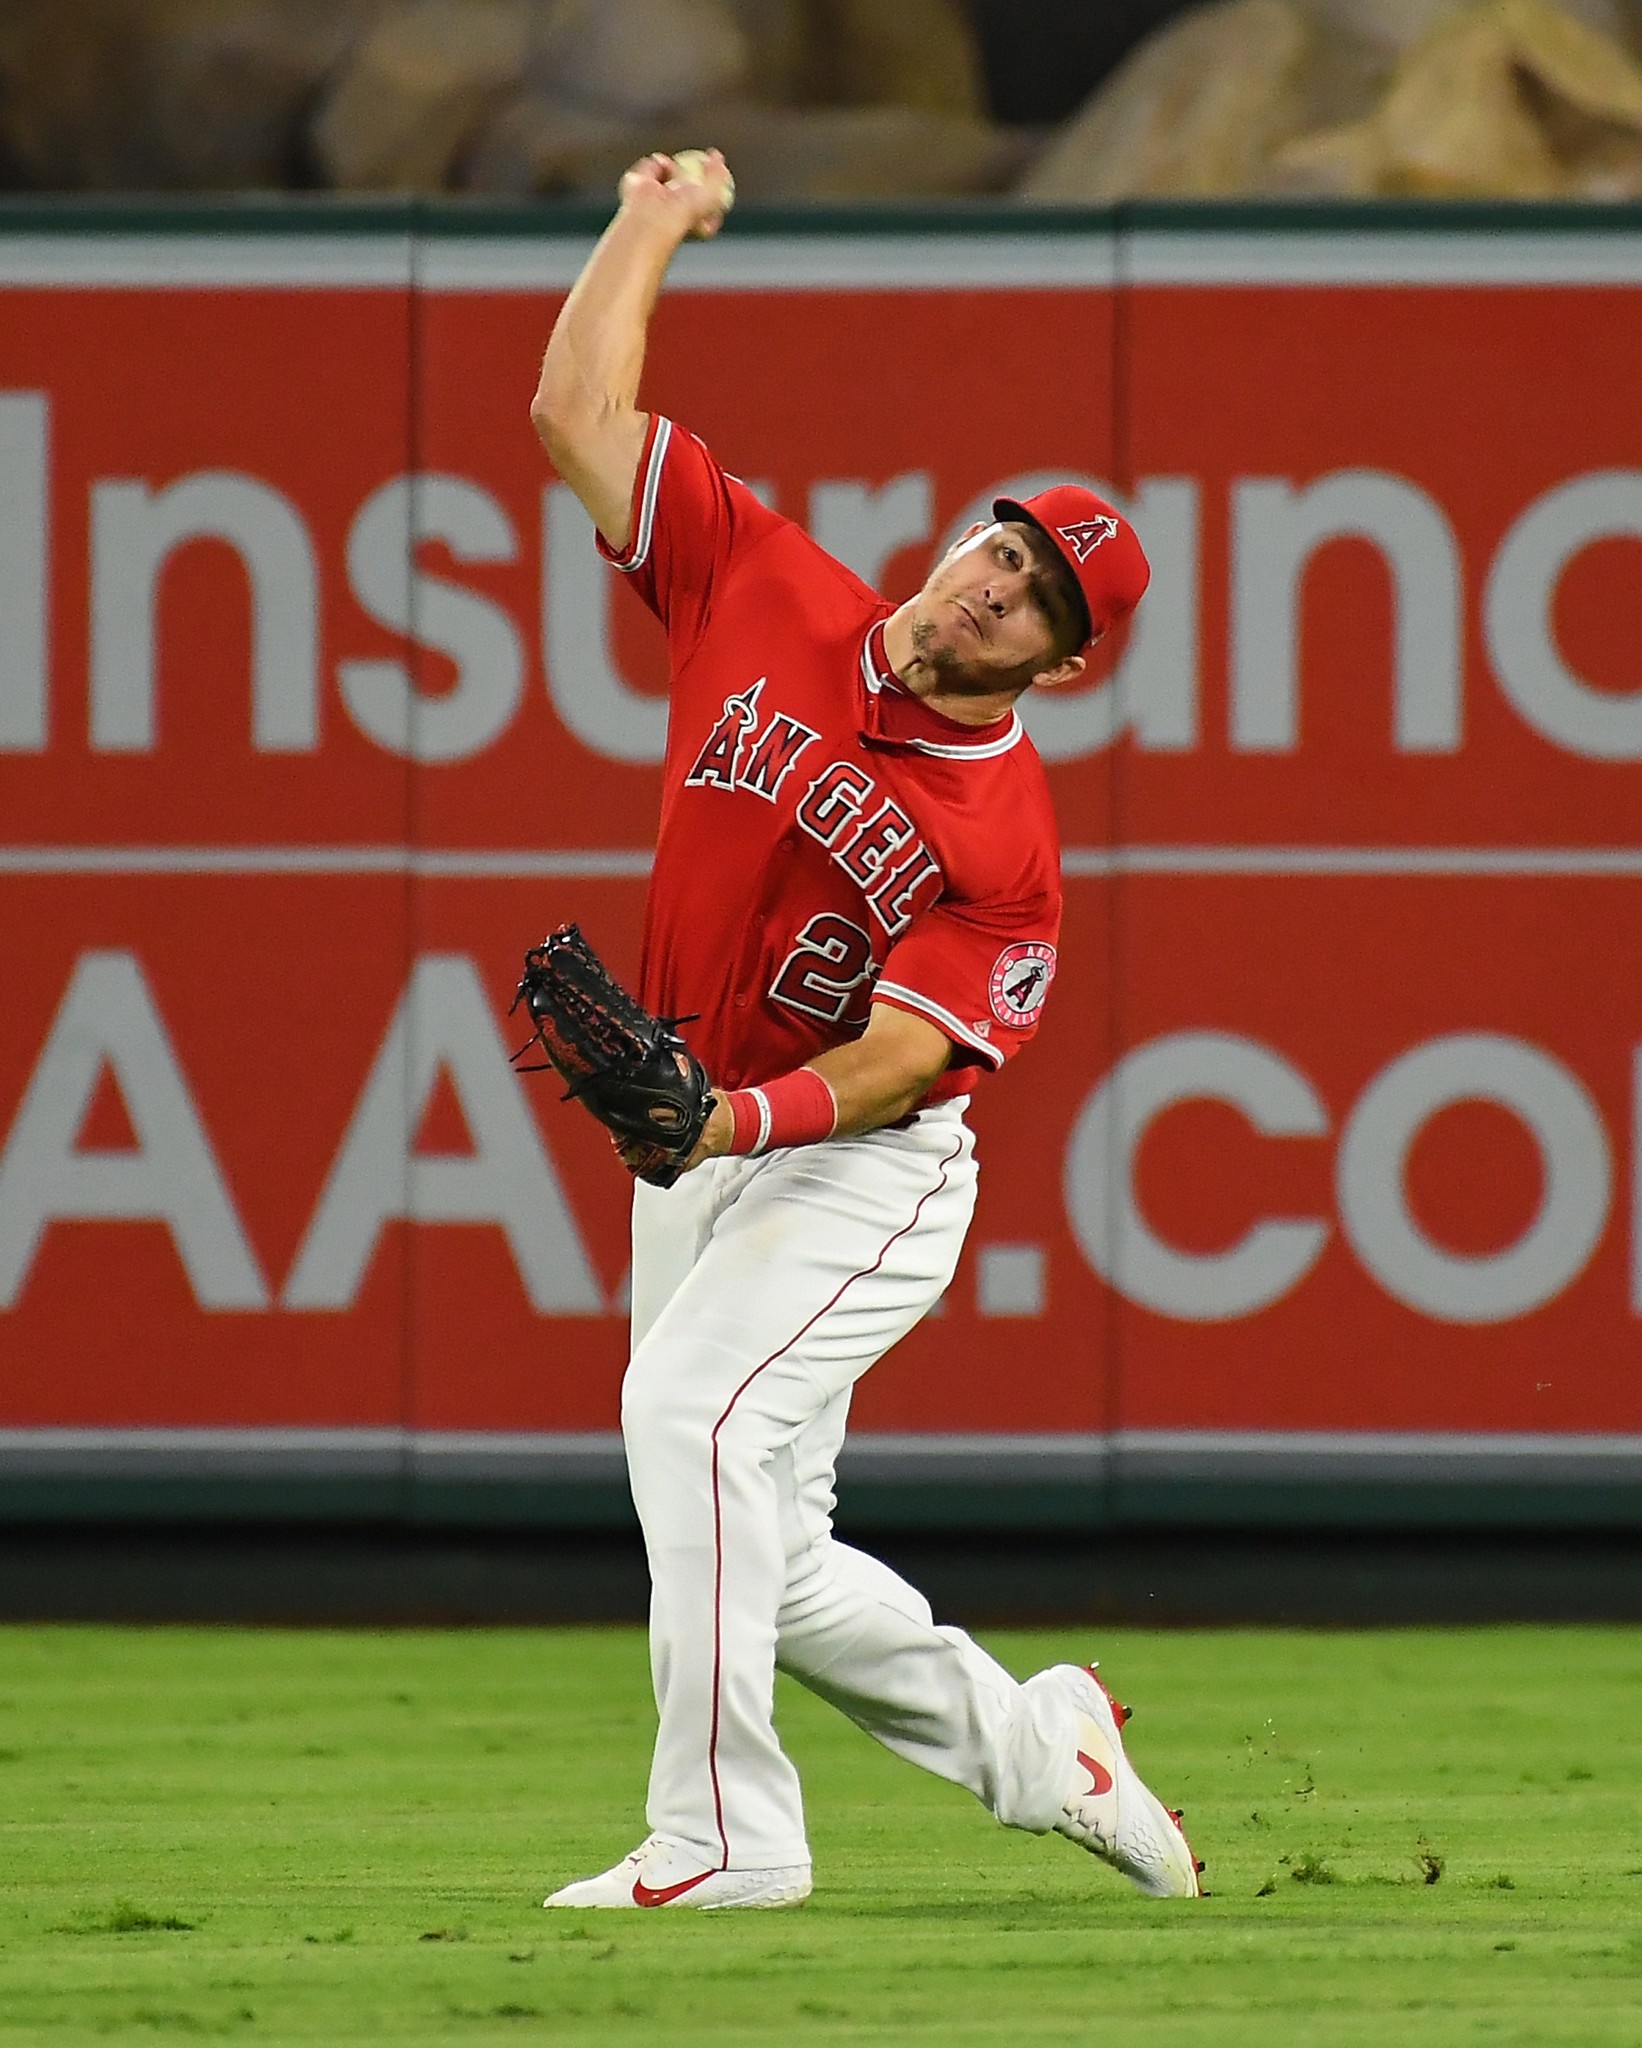 Mike Trout on a mission to improve his defense, and maybe win a Gold Glove  – San Bernardino Sun